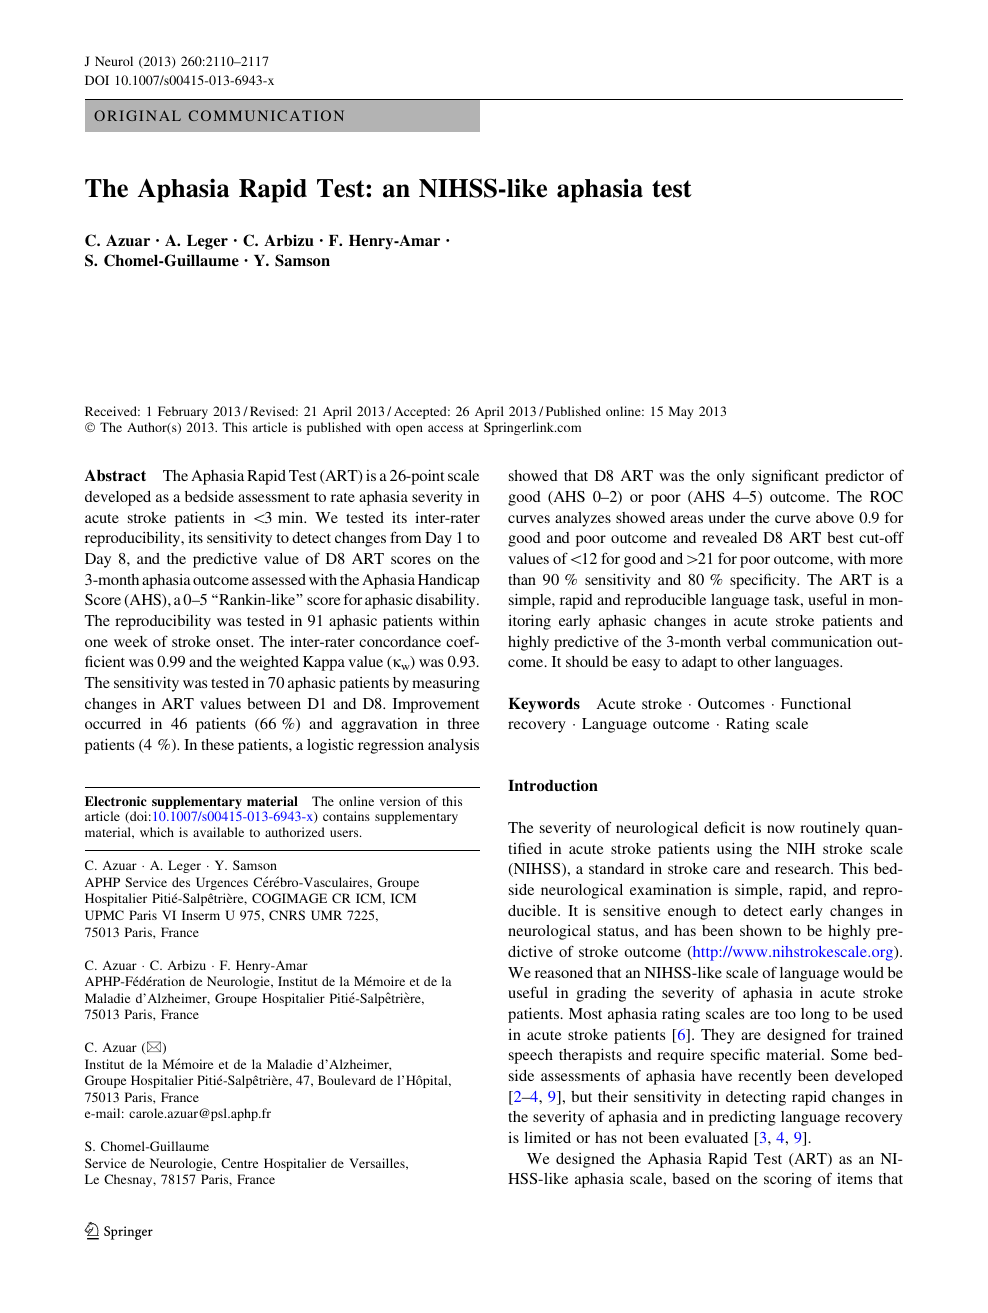 Aphasia Test - an overview